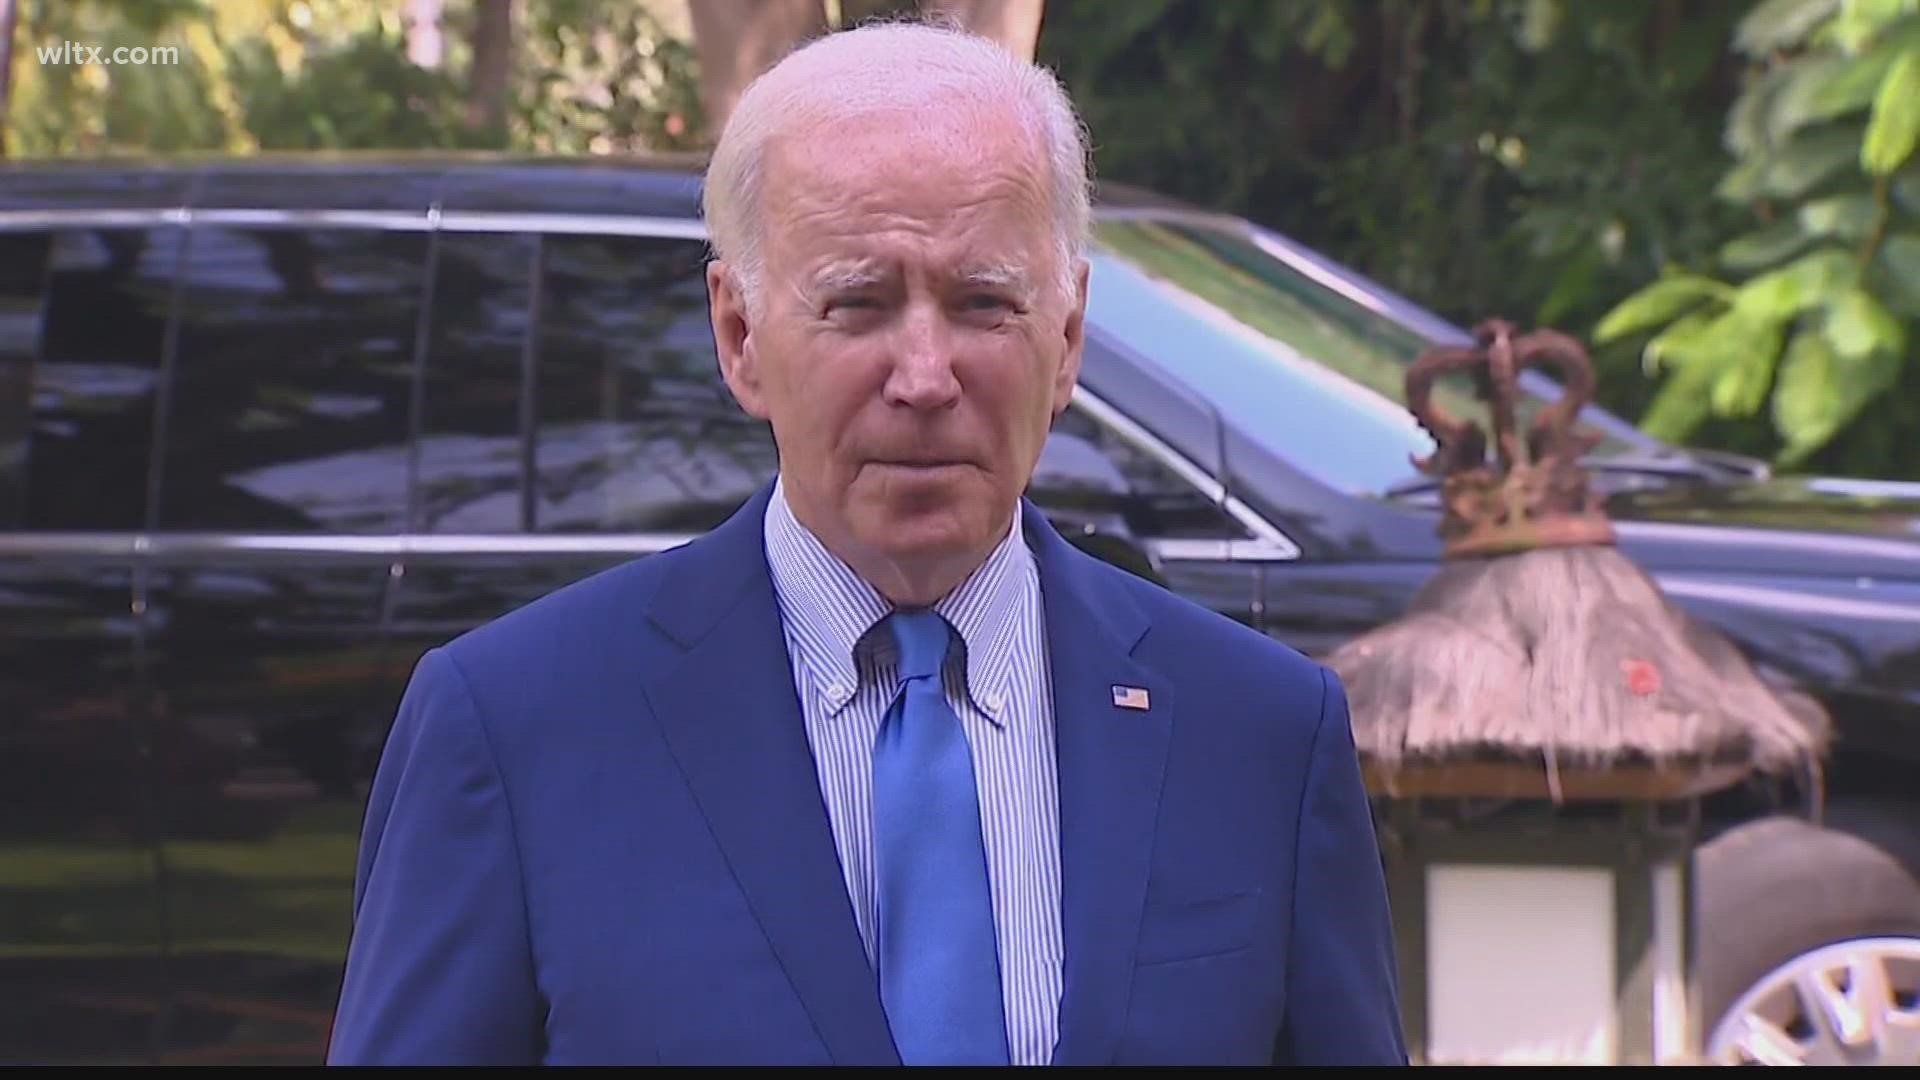 Biden said he expressed condolences to the Polish president and offered full support for Poland's investigation into what it had called a “Russian-made” missile.